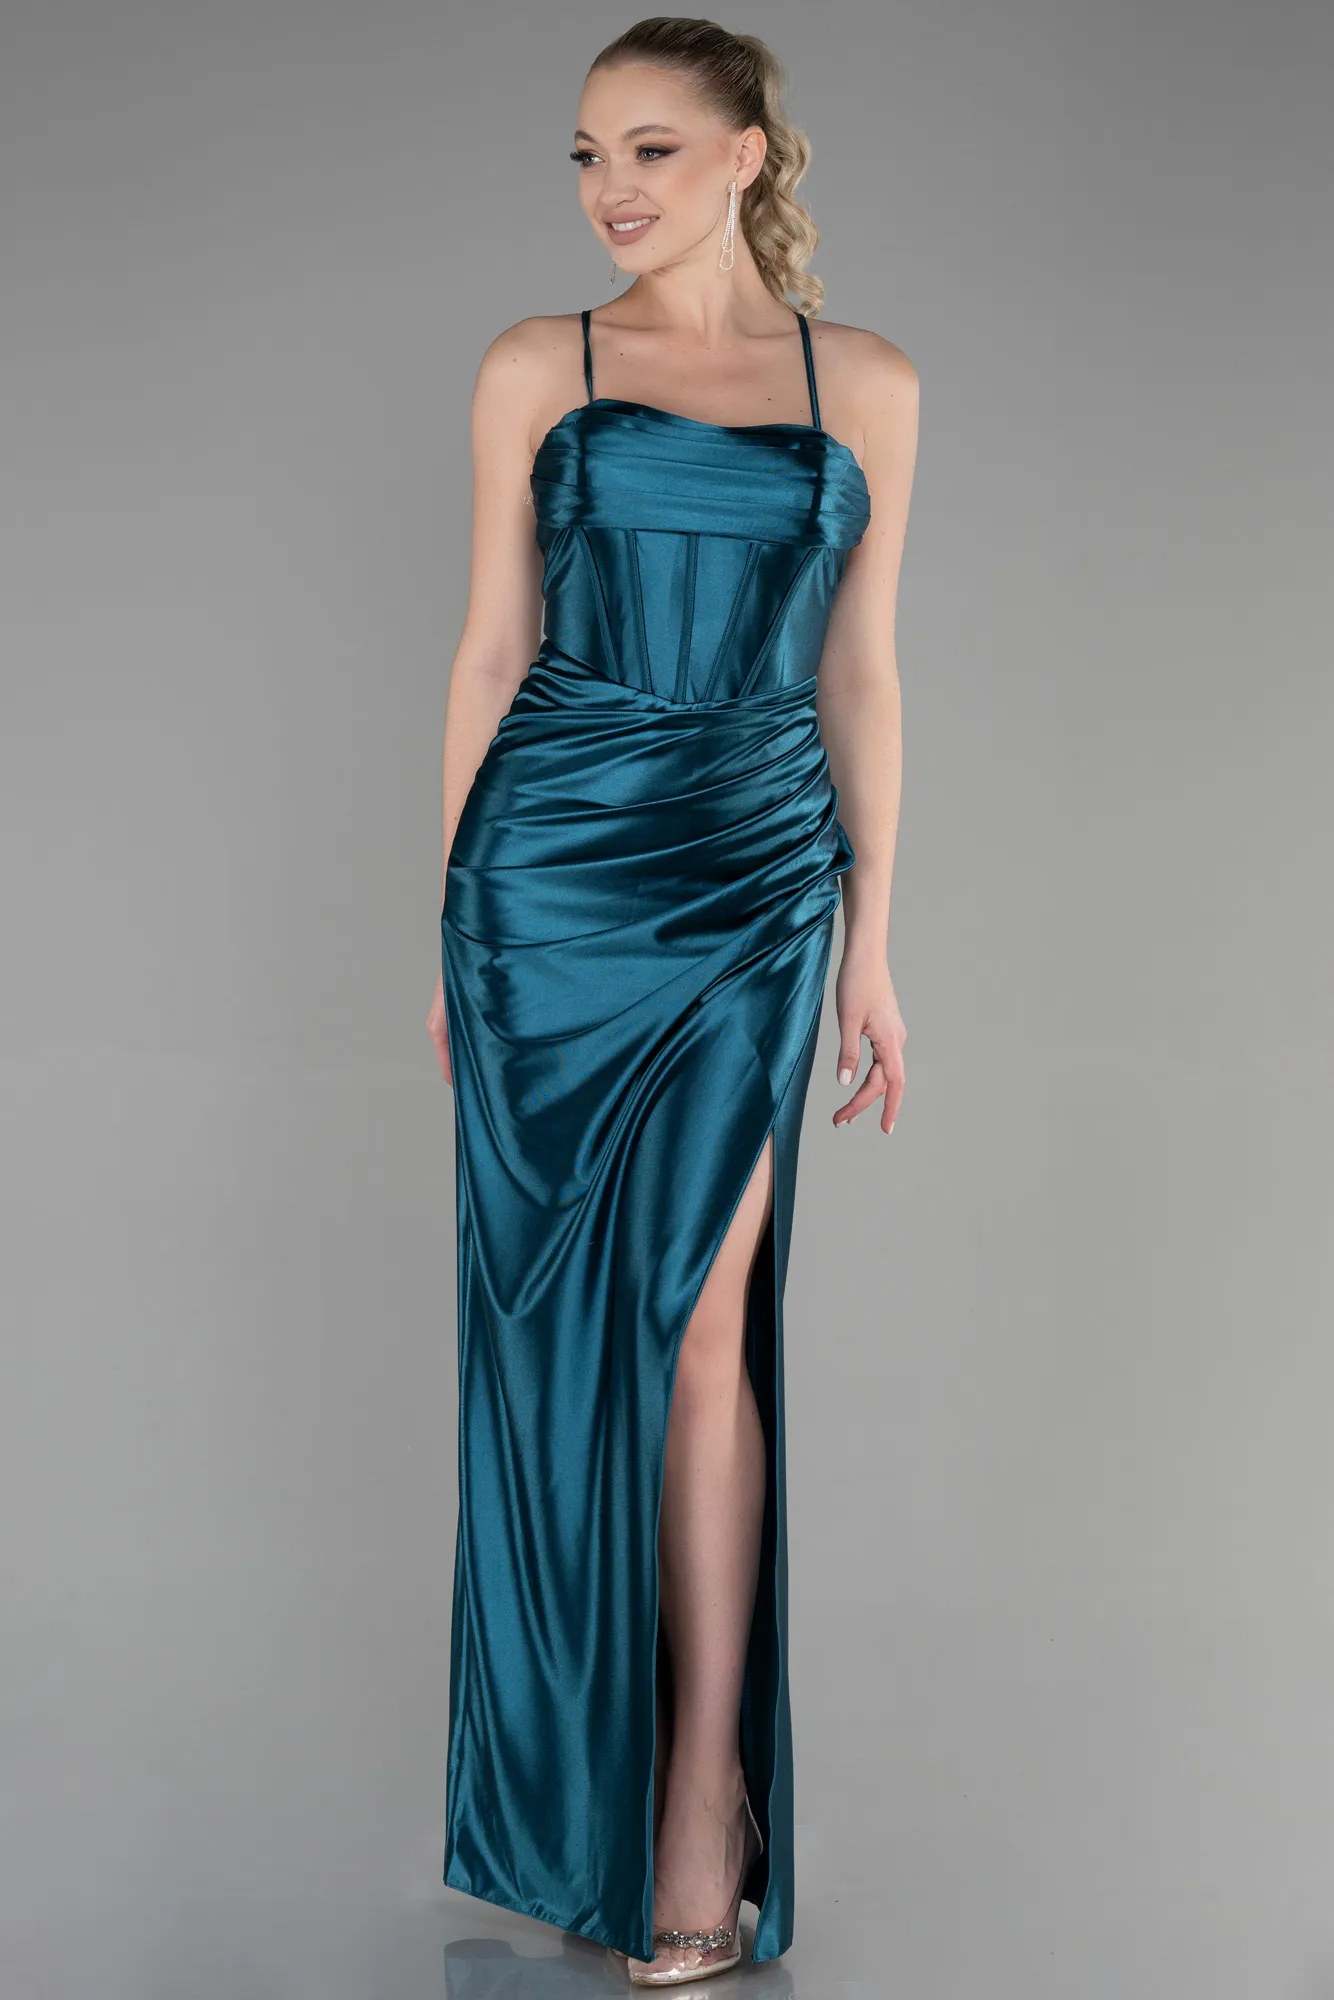 Oil Green-Long Prom Gown ABU3247